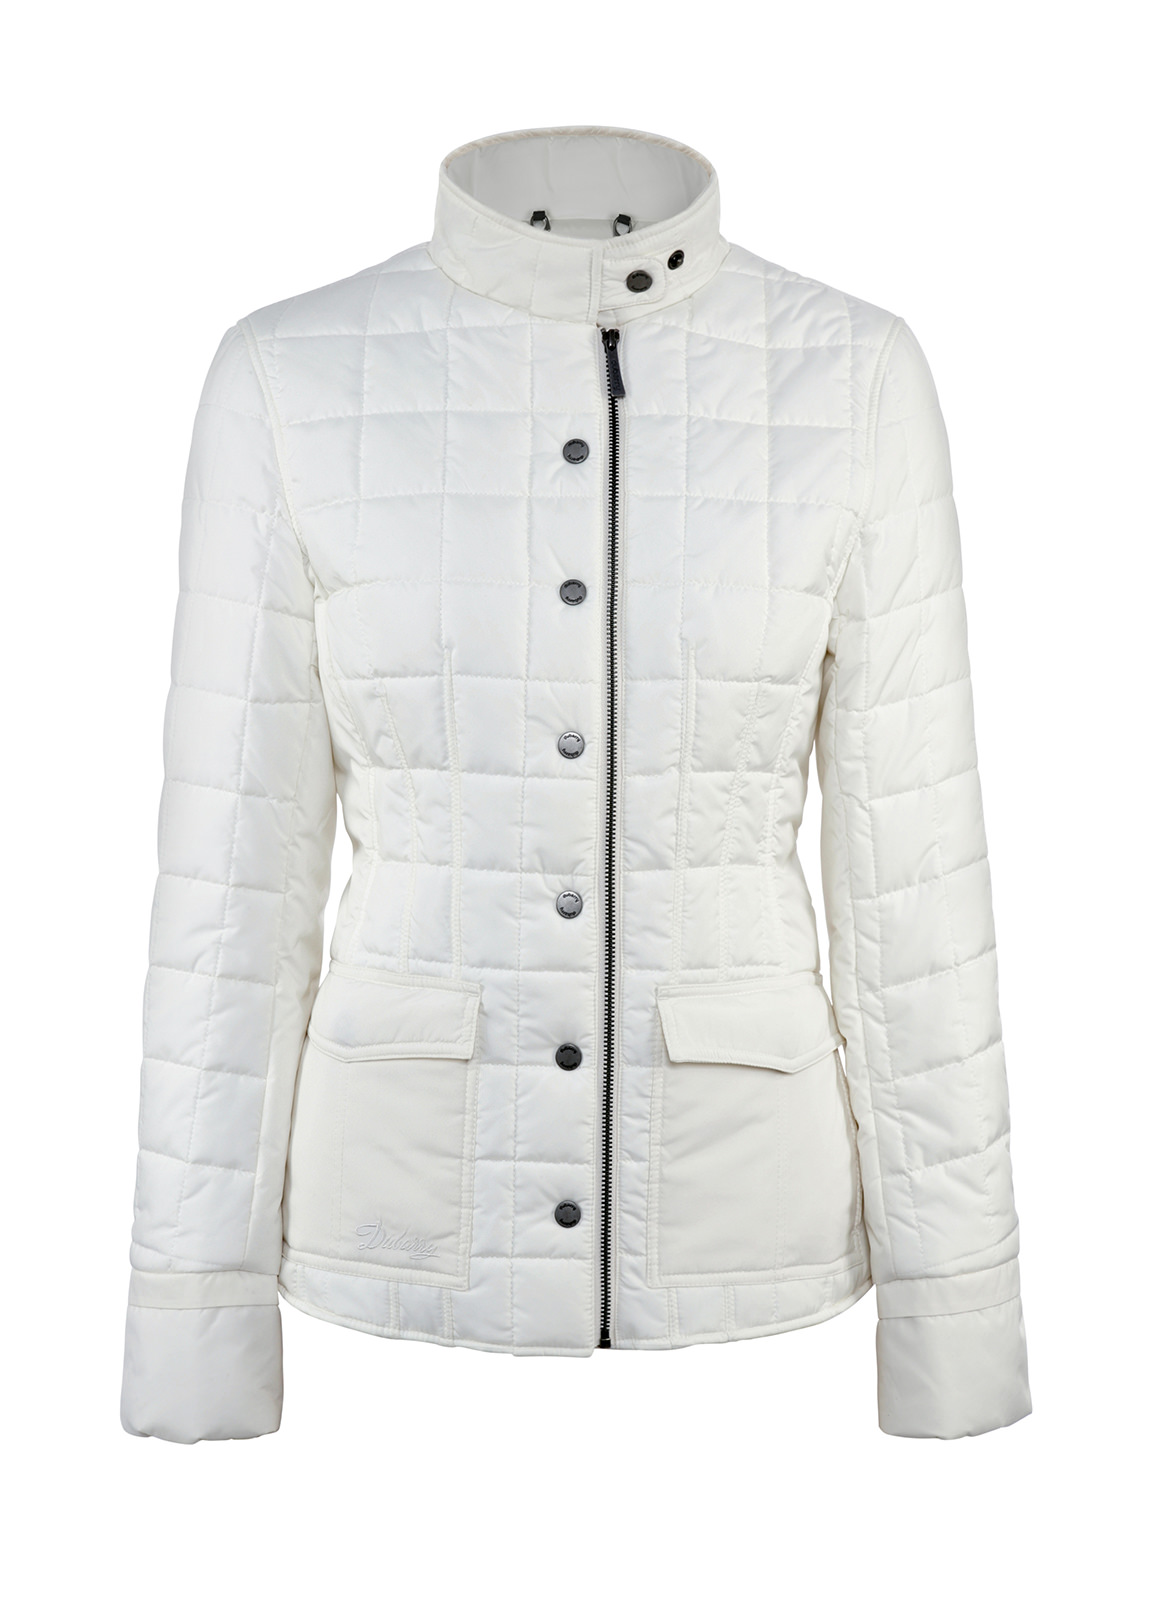 Dubarry_ Carra Womens Quilted Jacket - Sail White_Image_1